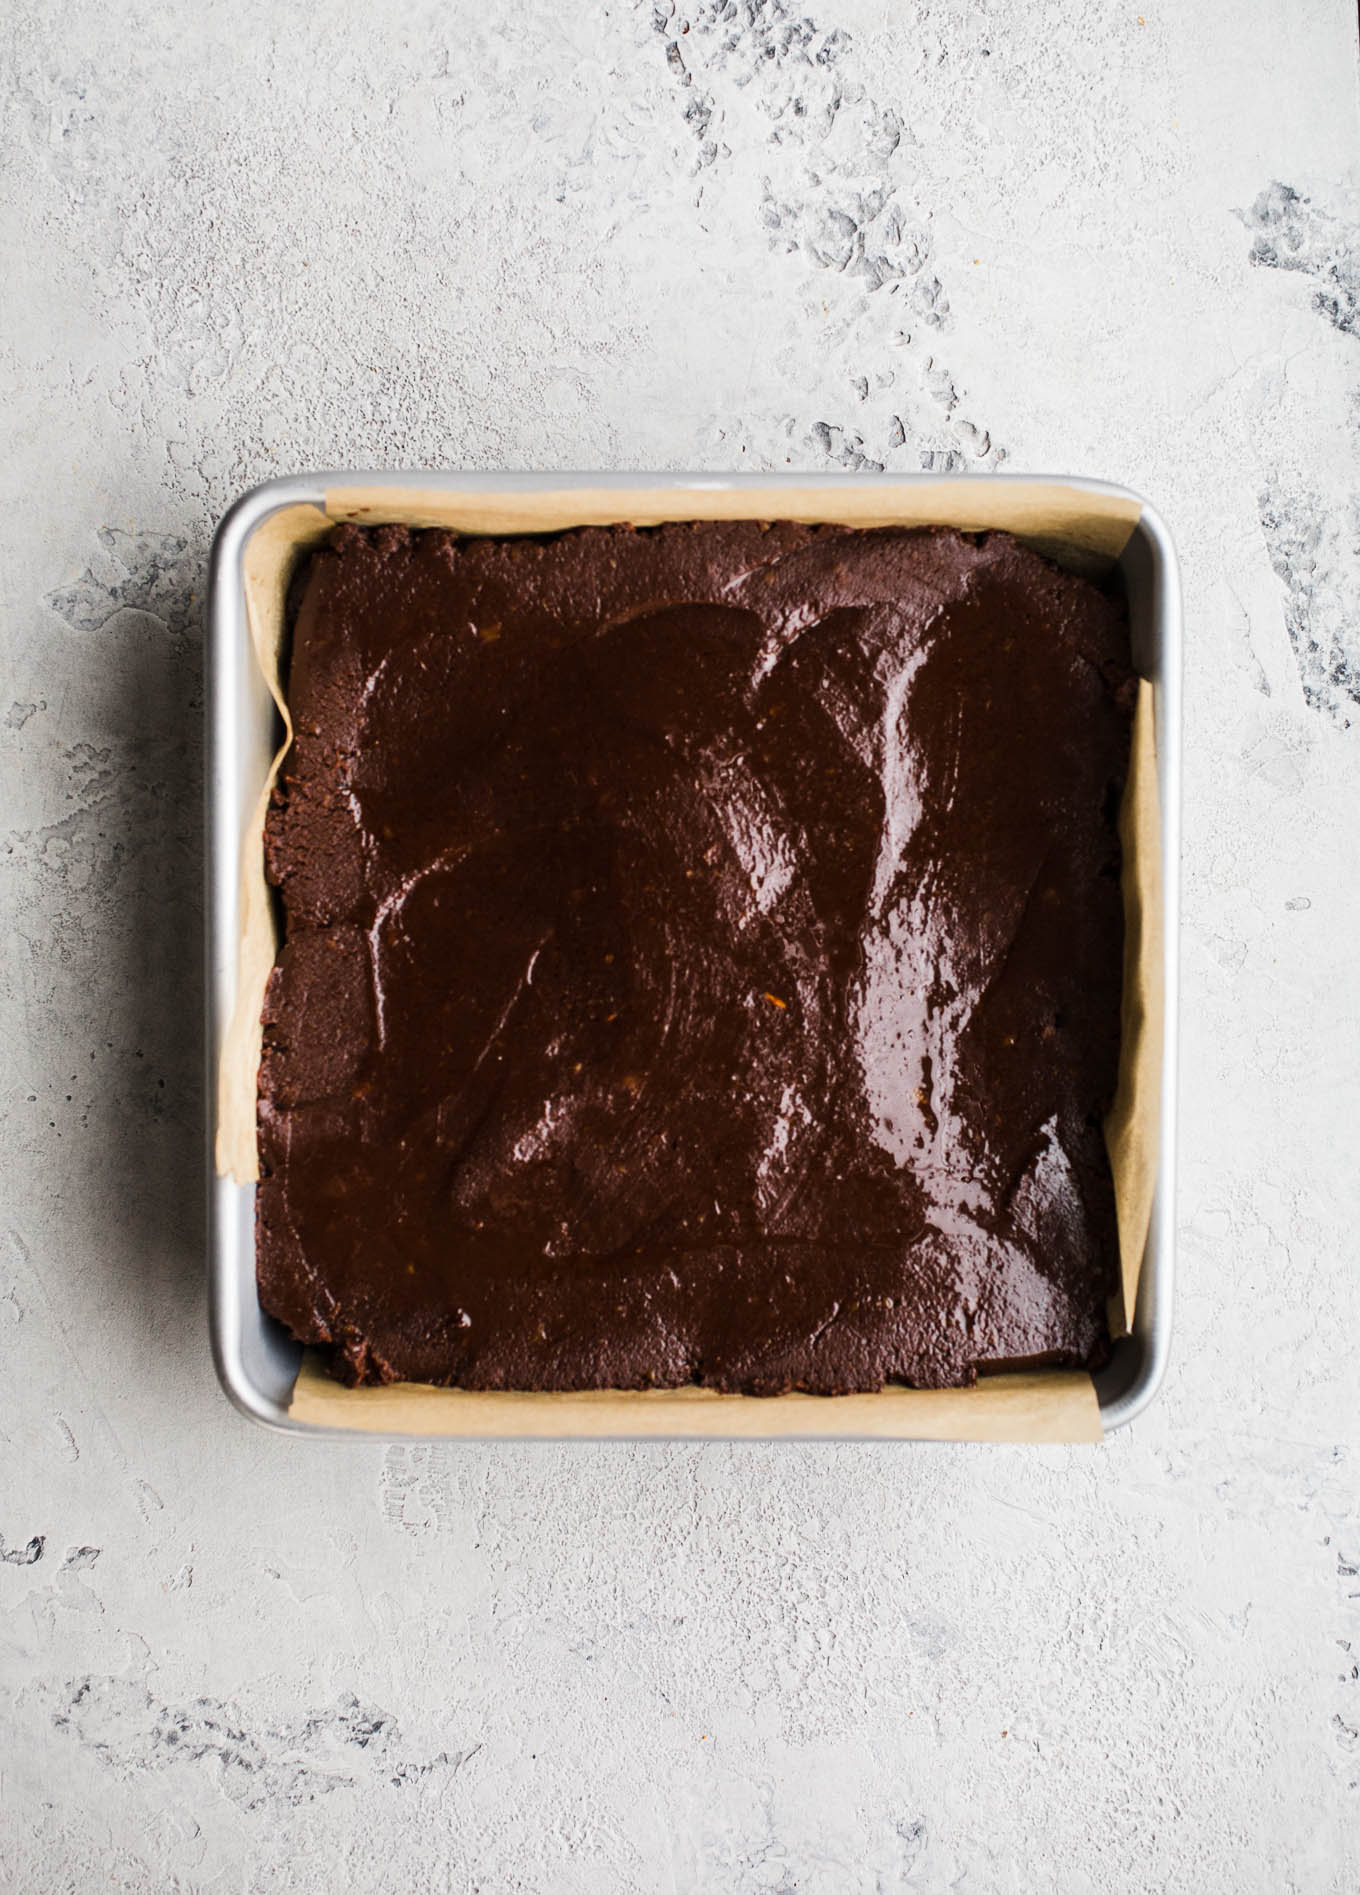 Easy Sweet Potato Brownies made with 5 ingredients for a decadent, healthier brownie. Gluten-free, vegan, refined sugar-free. 